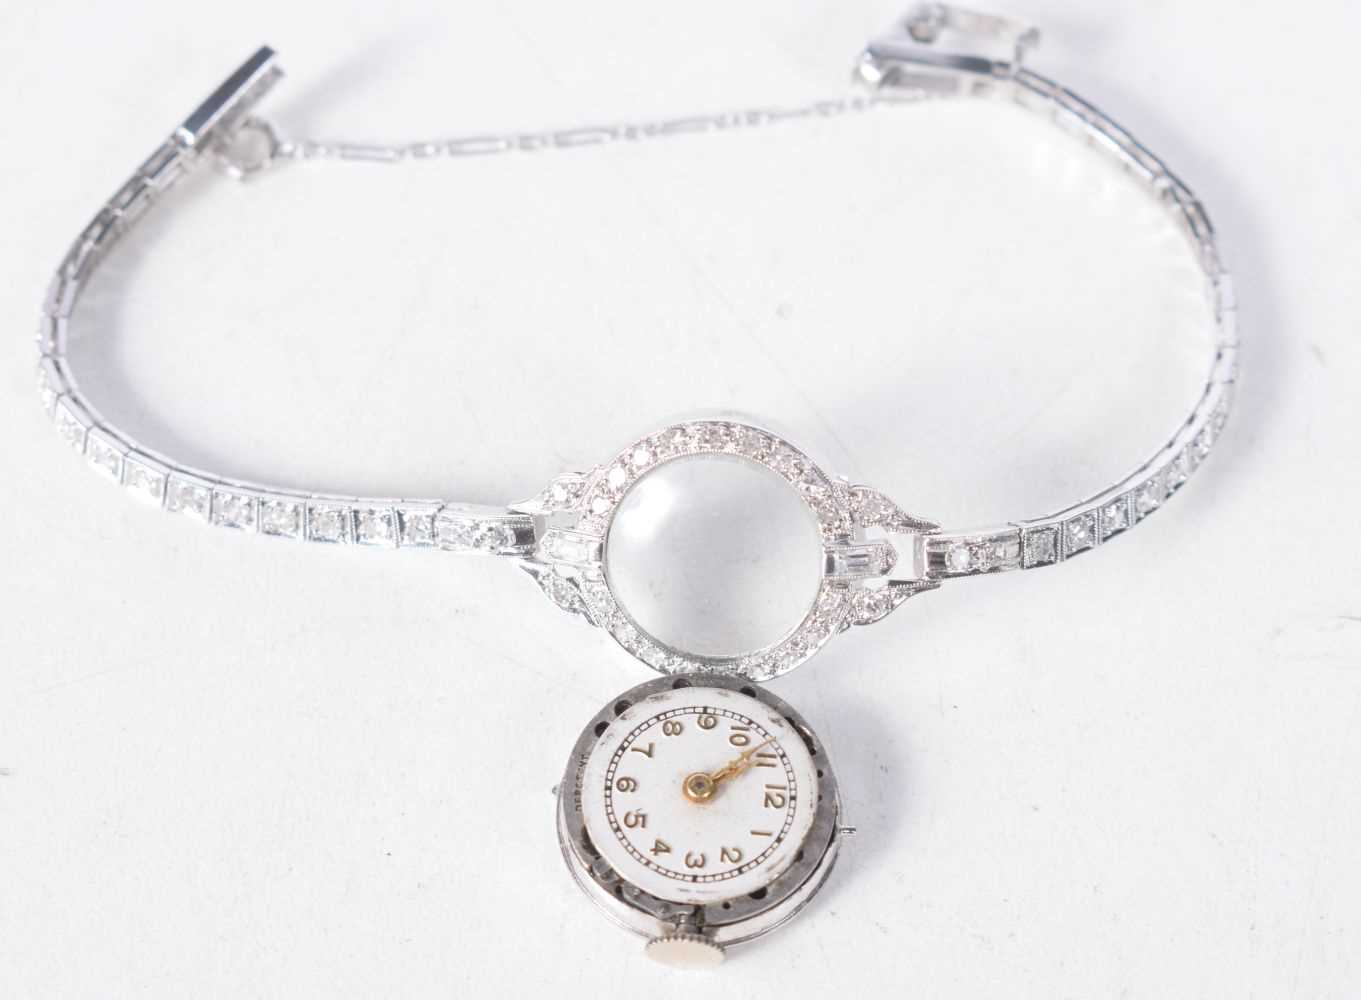 A Platinum Ladies Cocktail Watch set with diamonds. Stamped 10% IDID.PLAT. Length 13.5 cm, Dial 1.